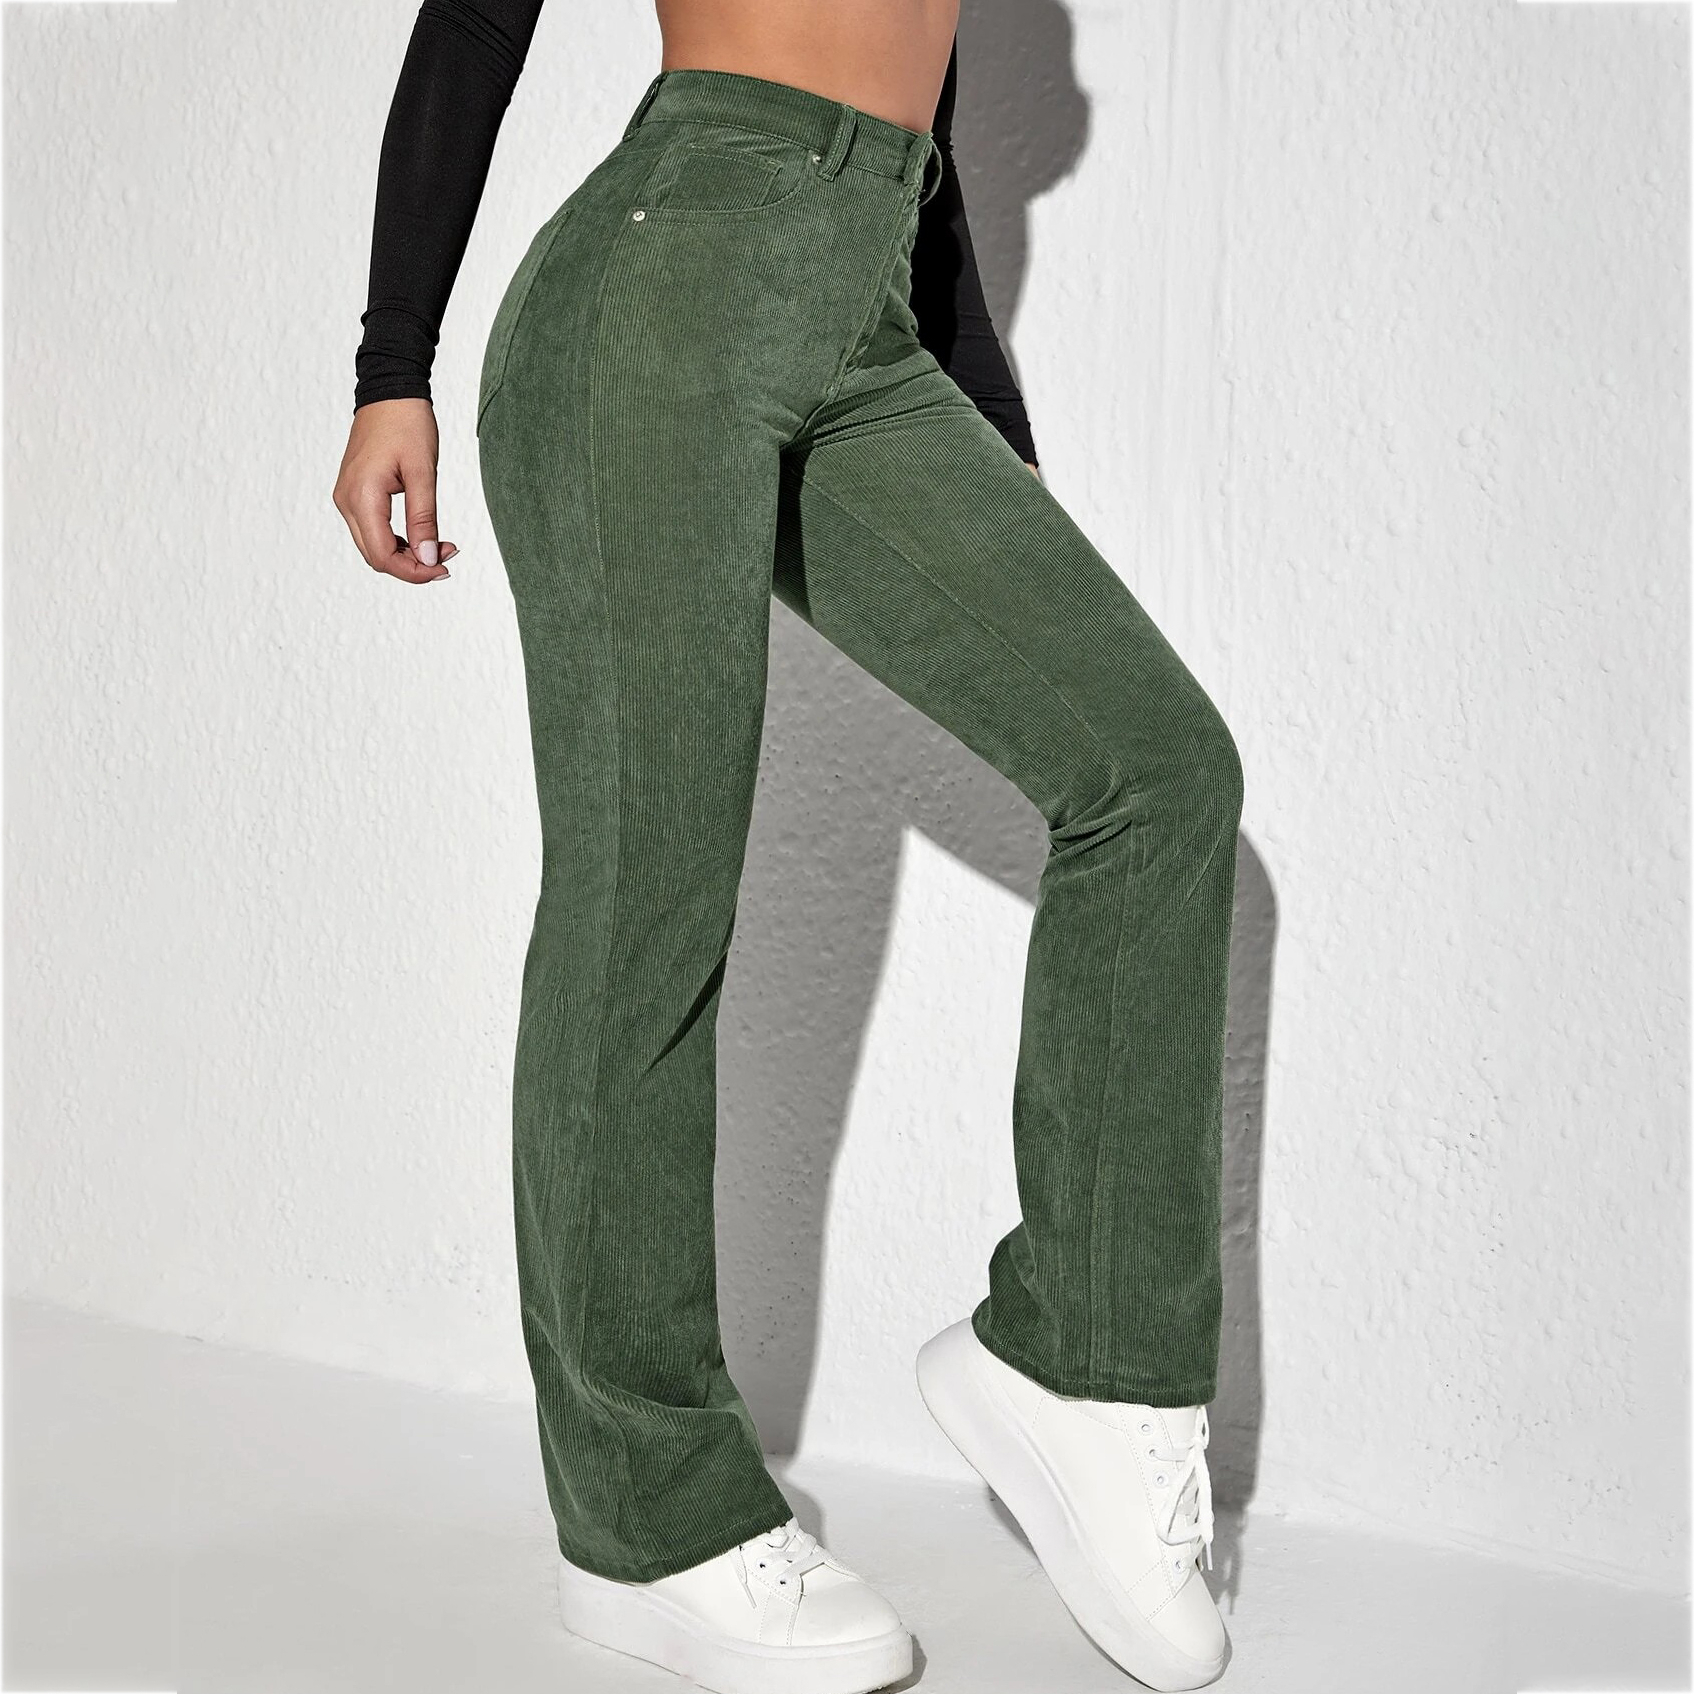 Letter Patched Flare Leg Corduroy Pants - Green, L